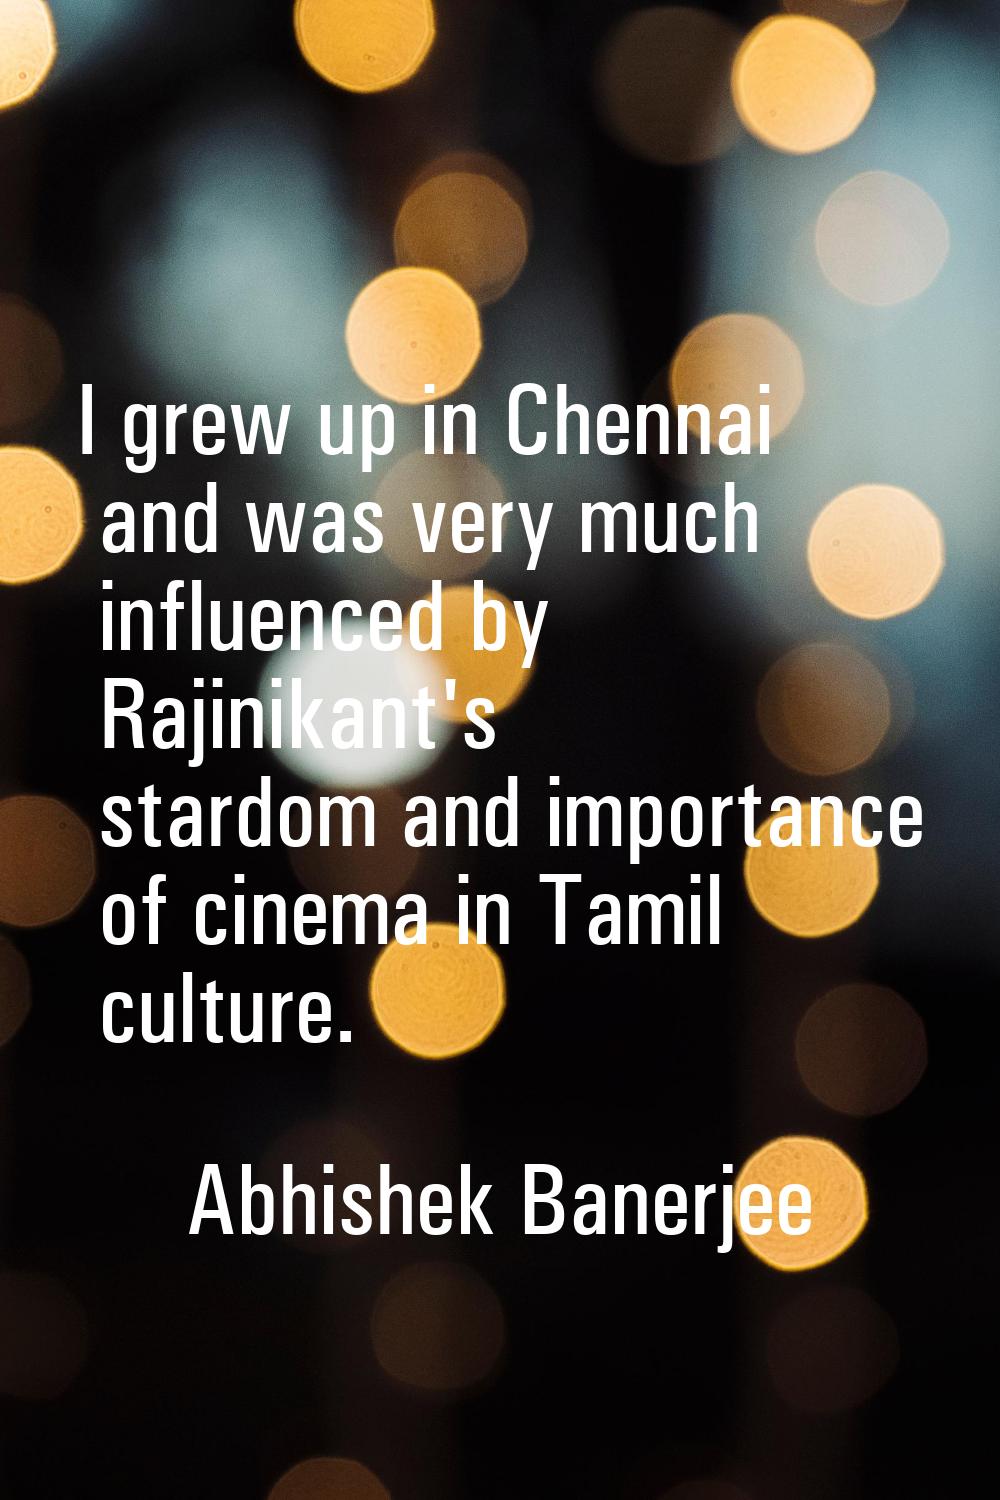 I grew up in Chennai and was very much influenced by Rajinikant's stardom and importance of cinema 